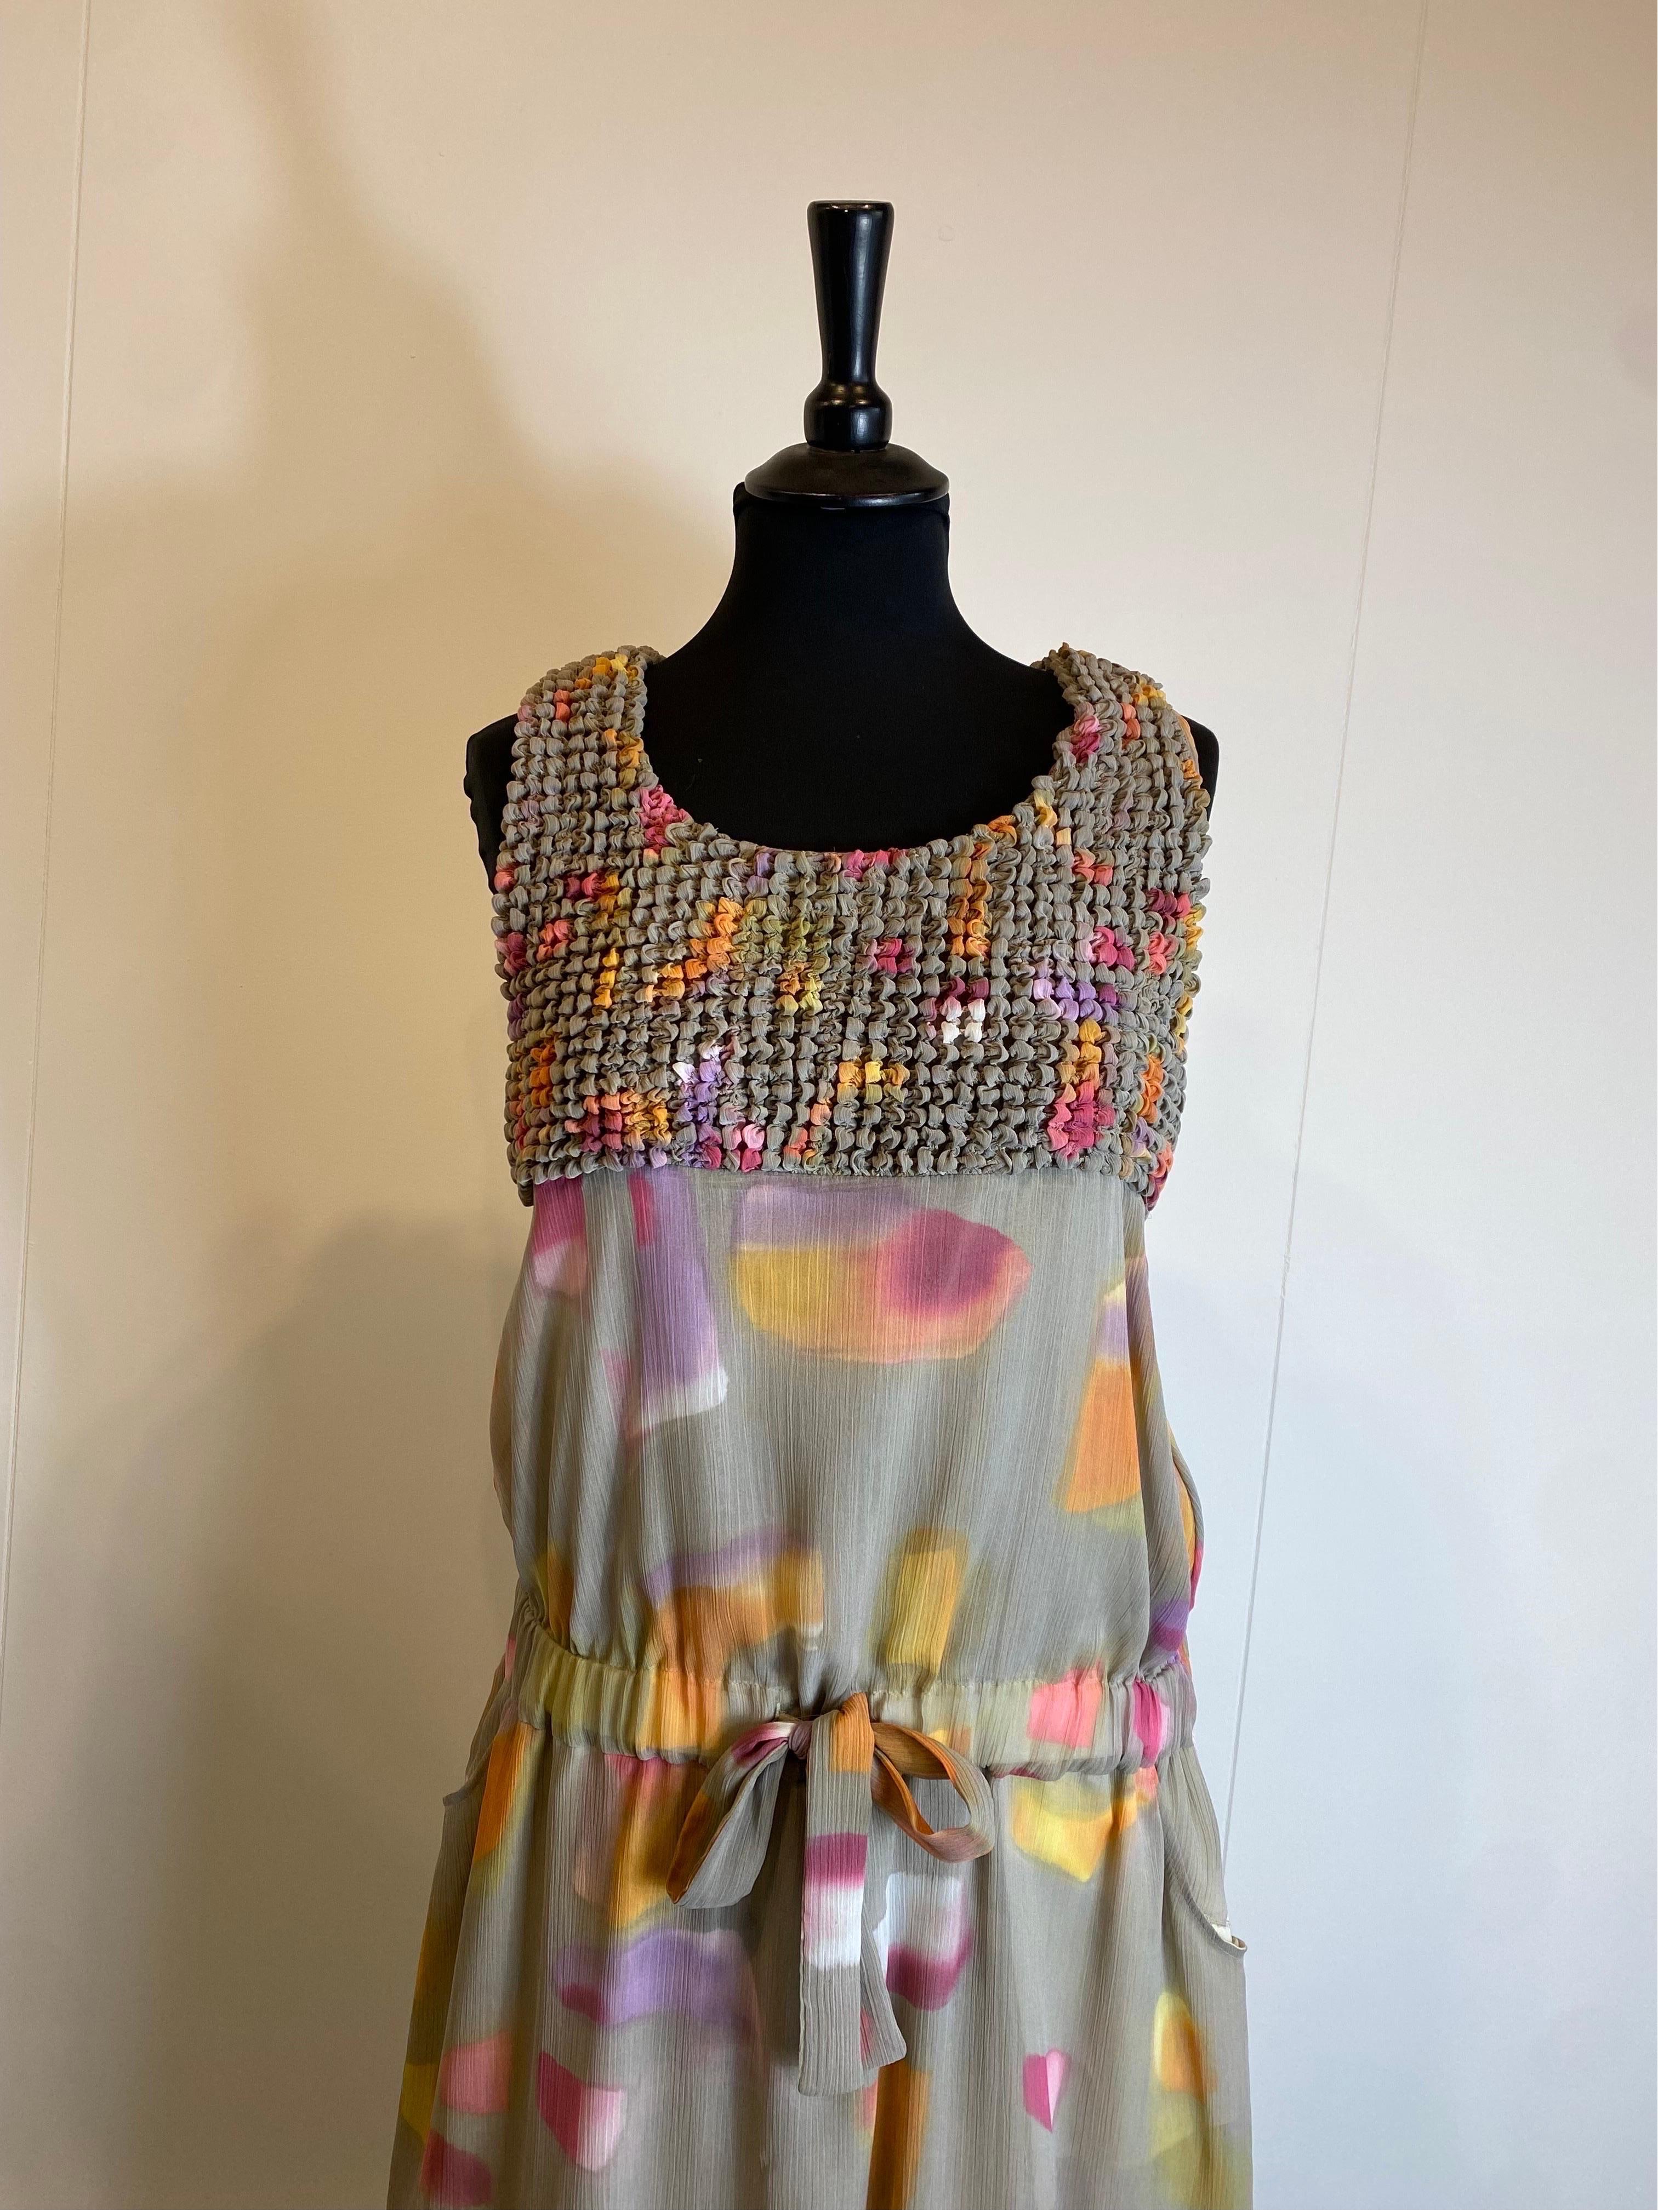 Fendi long dress.
Composition label missing but we think it is silk.
Cotton lined.
Very particular watercolor fantasy.
Features drawstring at hip height
Italian size 42
Bust 42 cm
Waist 40cm
Length 132 cm
Excellent general condition, with minimal